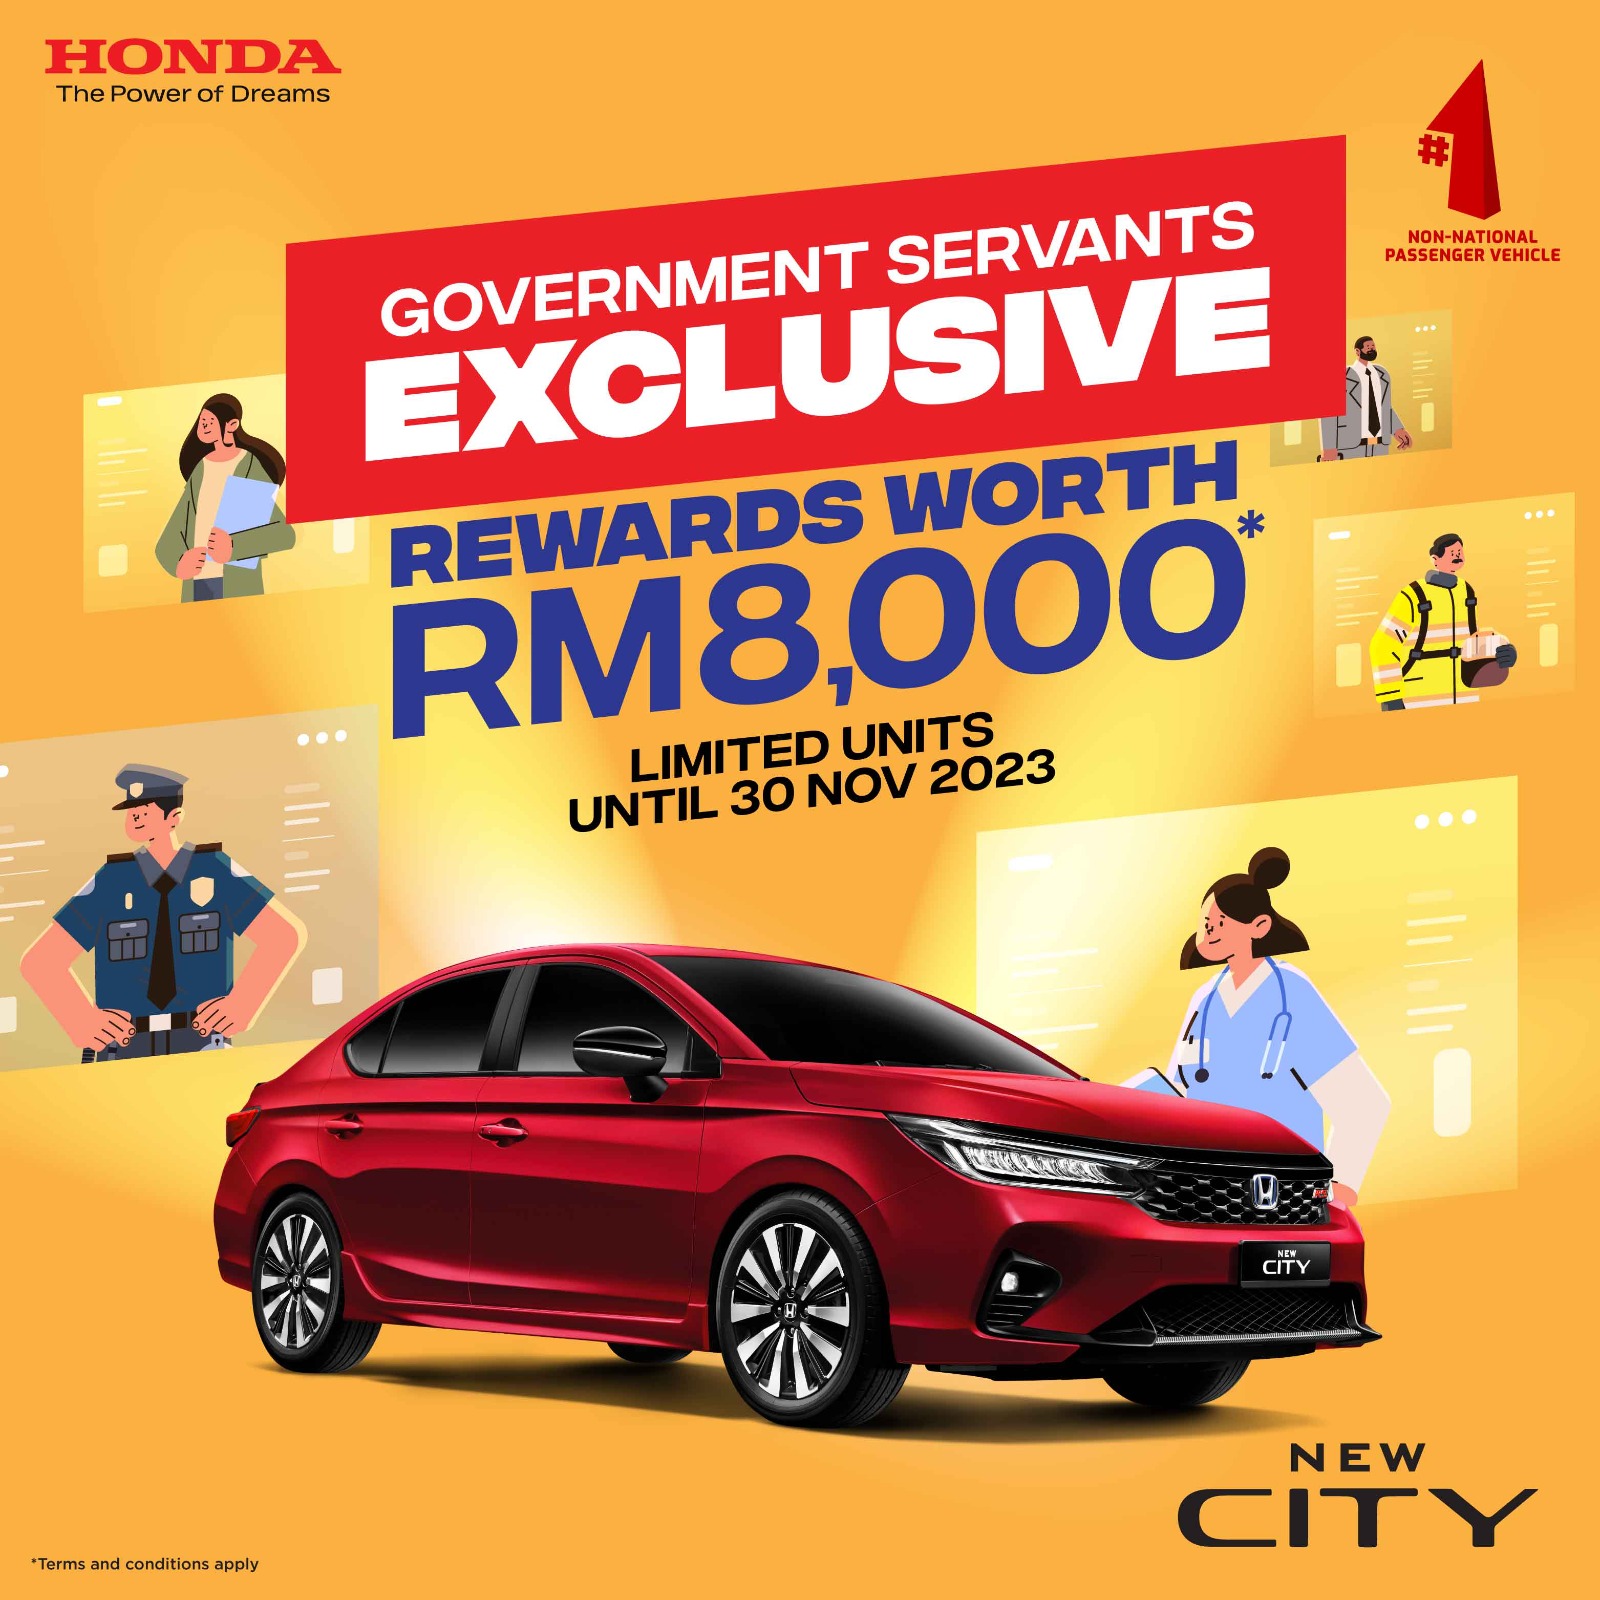 honda malaysia’s exclusive year-end promotion for government servants